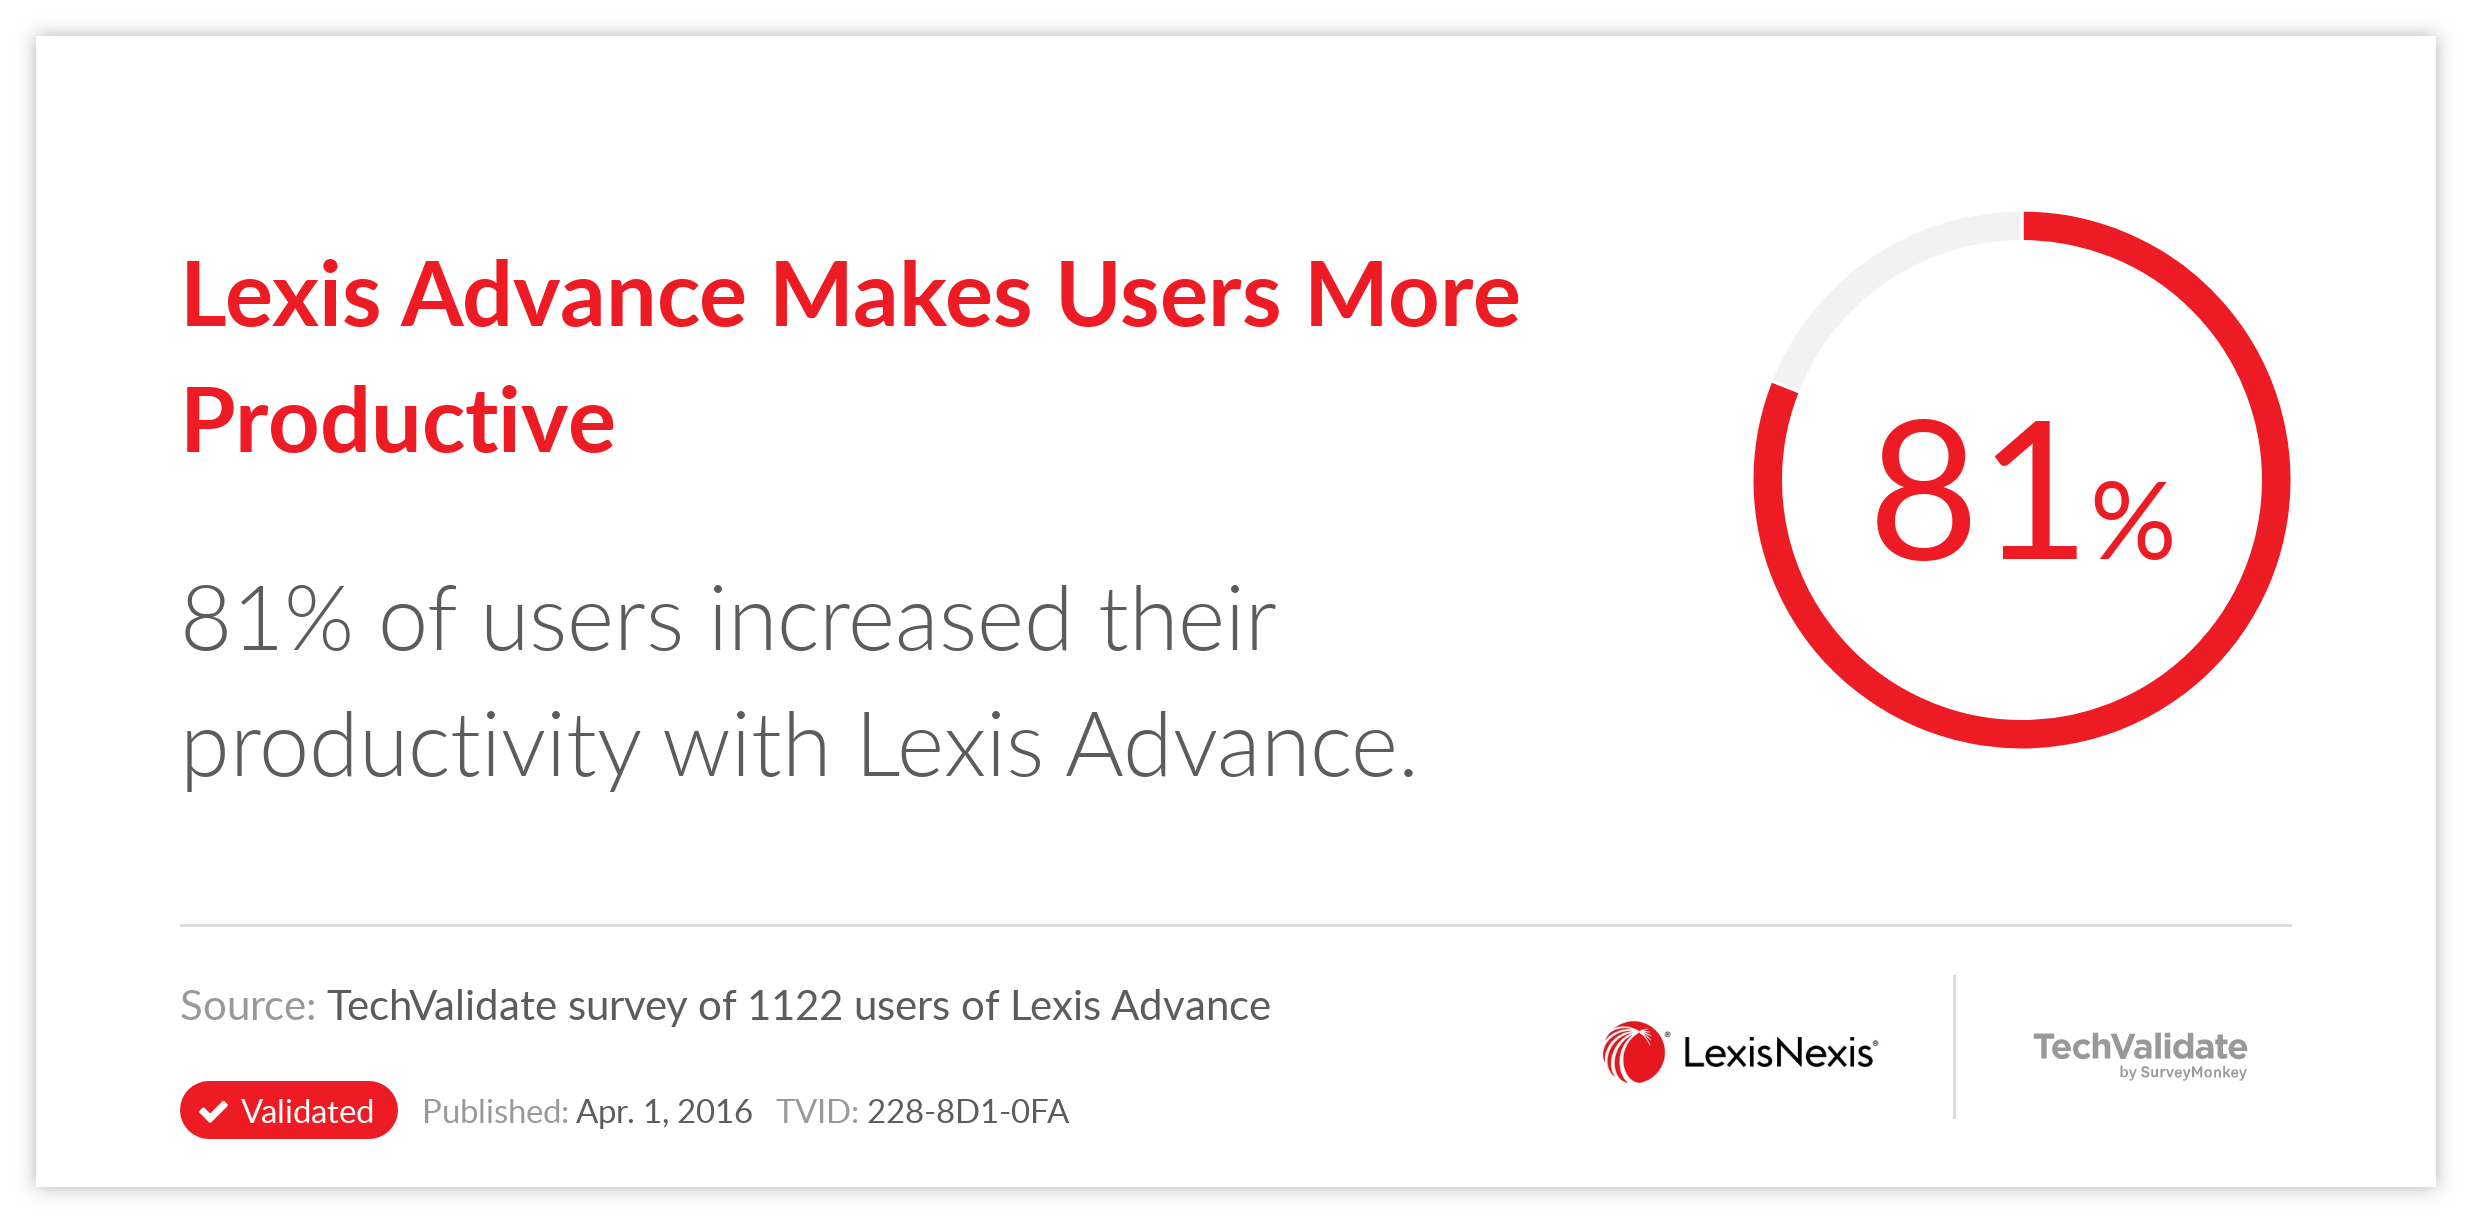 Lexis Advance Makes Users More Productive